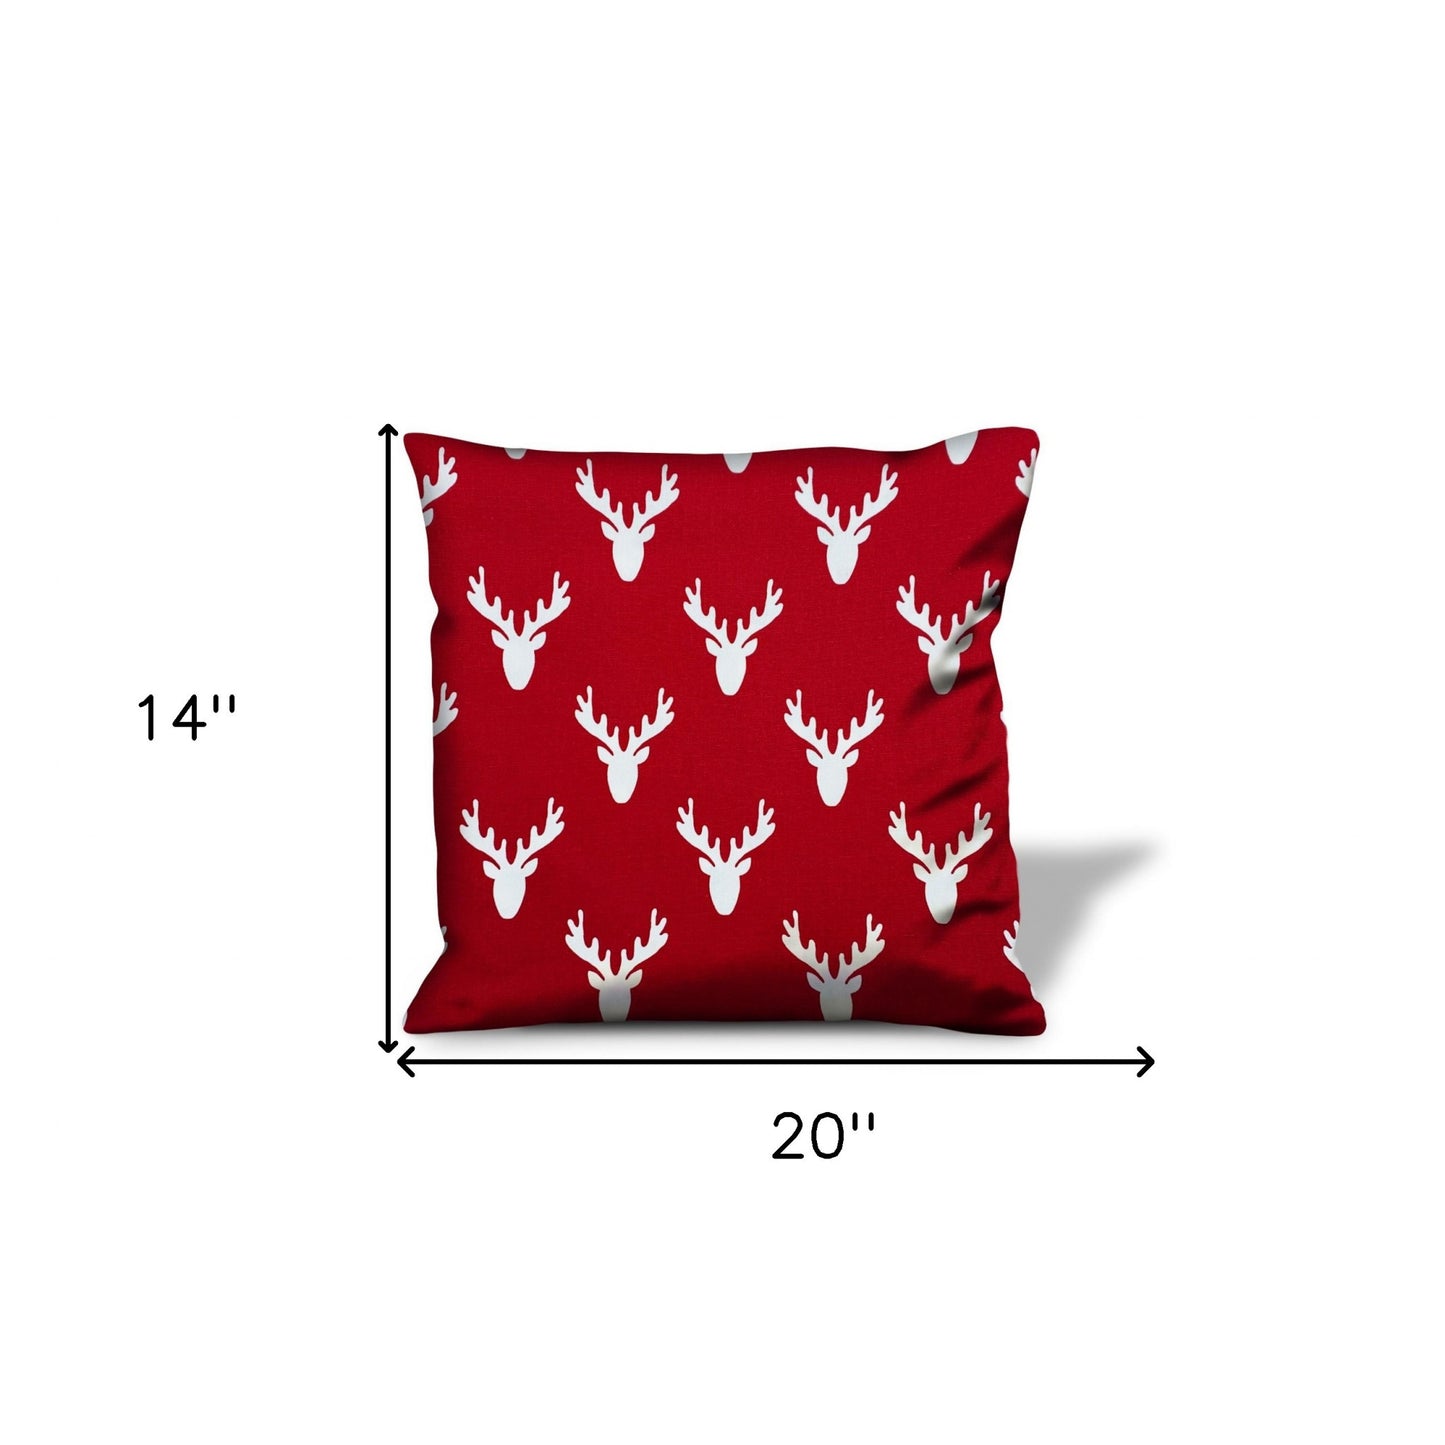 14" X 20" Red And White Zippered Christmas Reindeer Lumbar Indoor Outdoor Pillow Cover